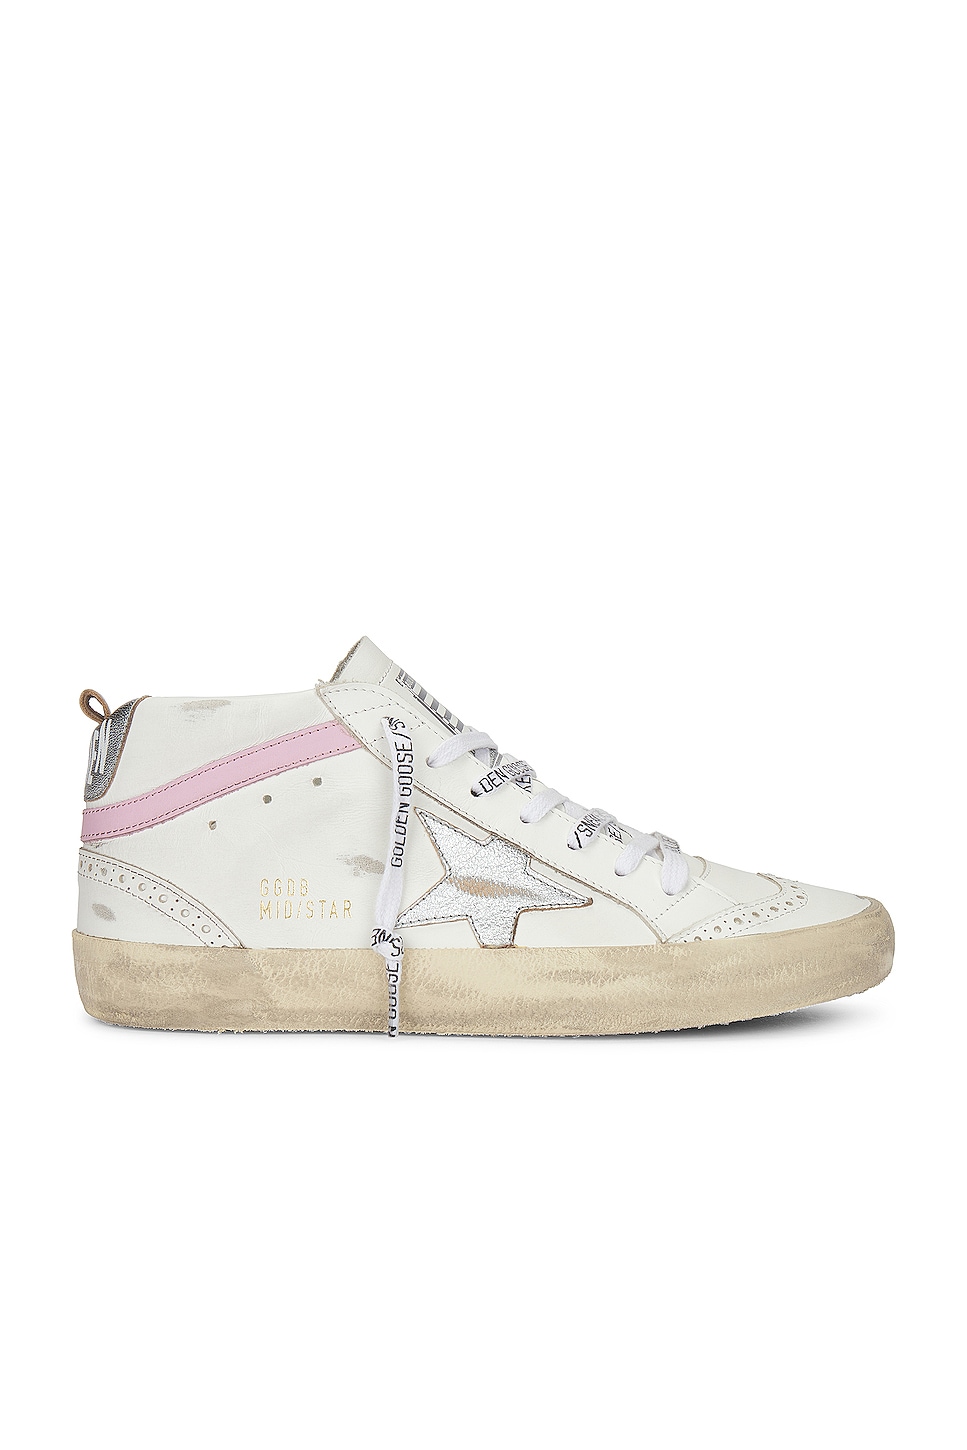 Image 1 of Golden Goose Mid Star Leather Upper Sneaker in White, Silver, & Pink